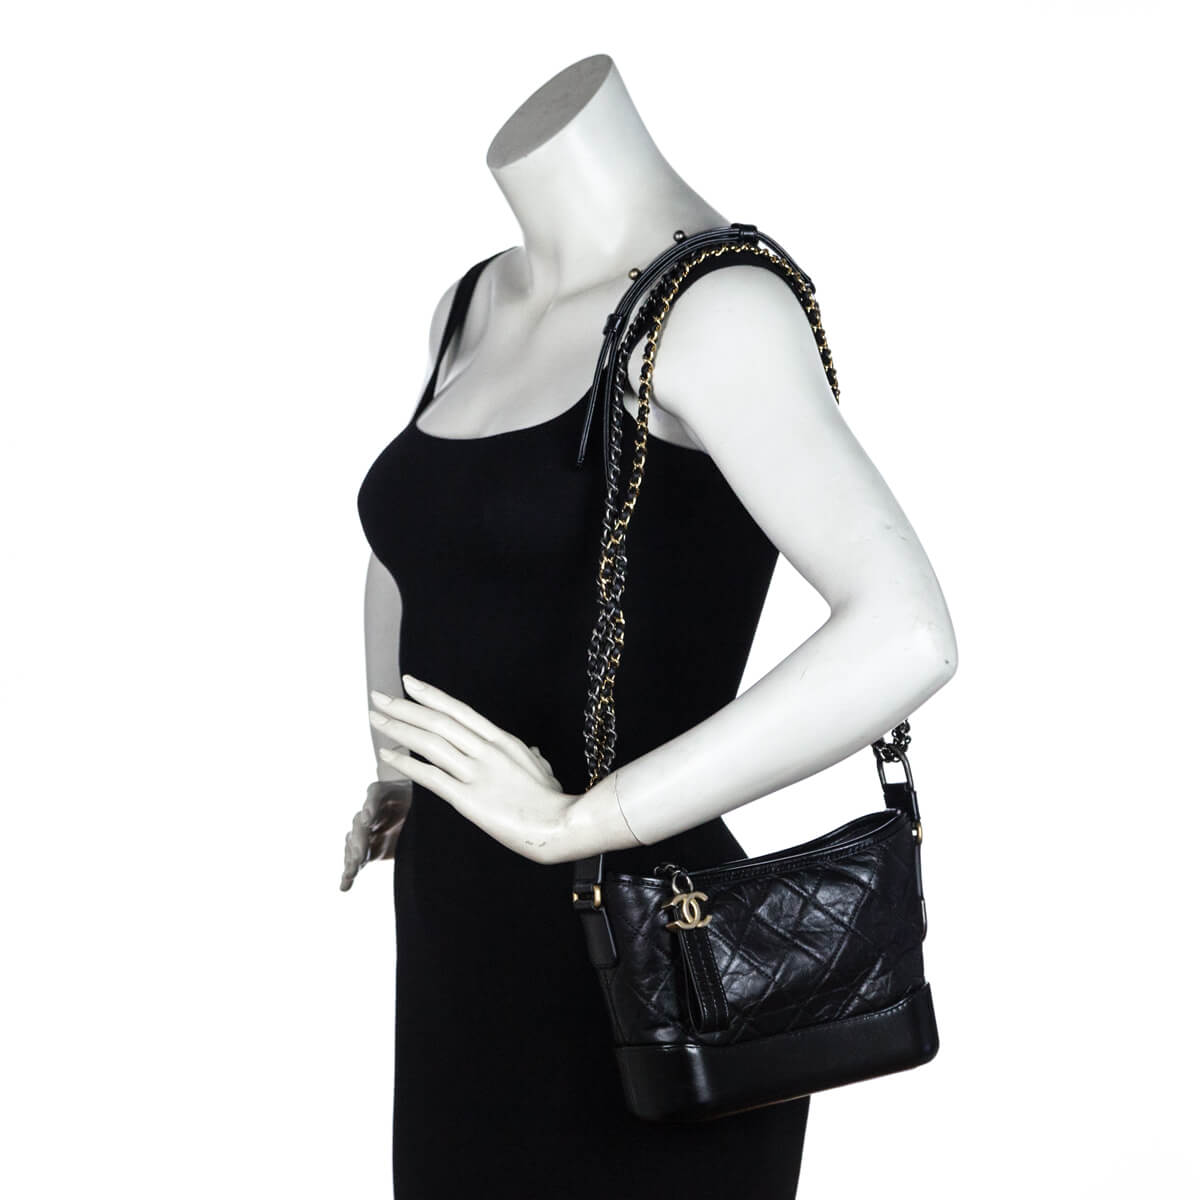 Chanel Black Aged Calfskin Small Gabrielle Hobo Bag - Luxury For Less